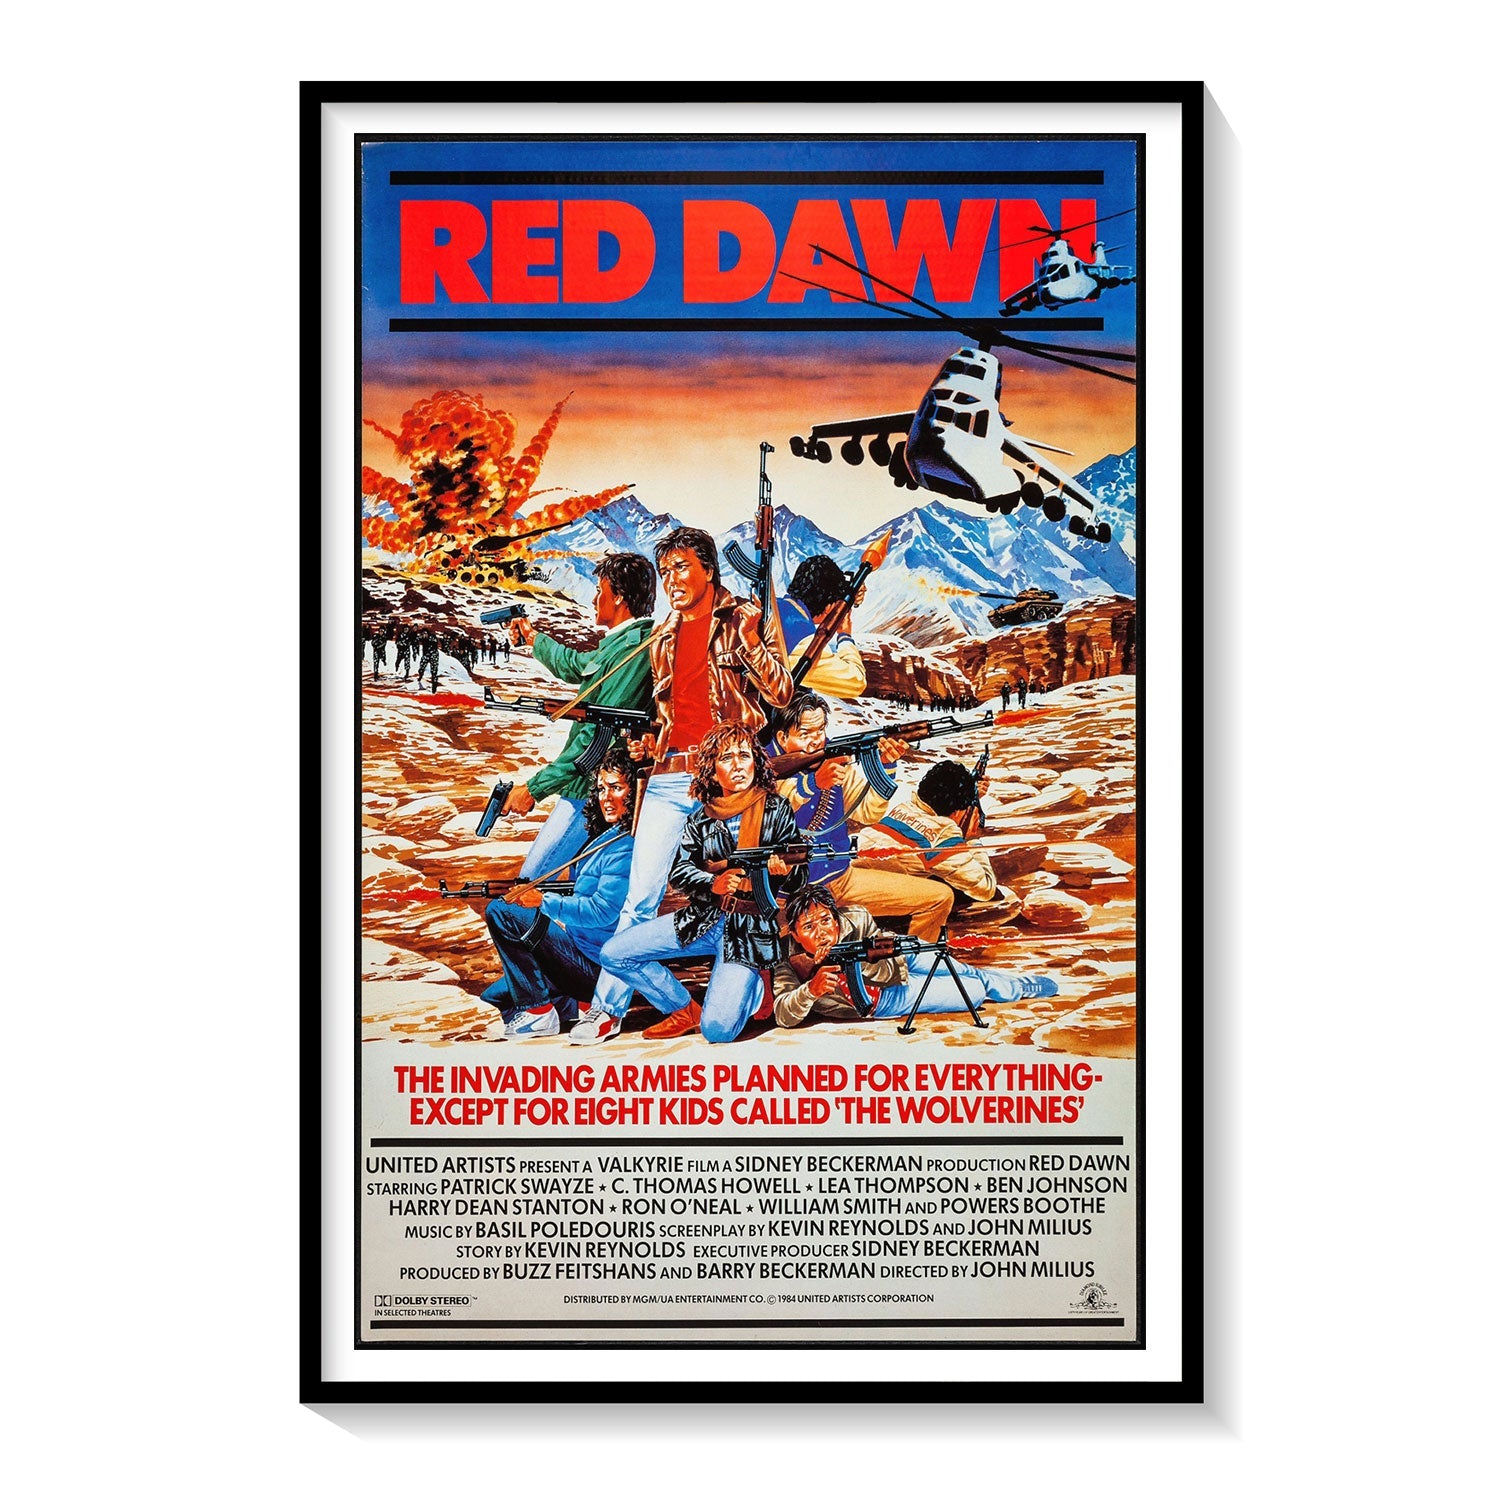 Red Dawn Old Movie Poster: Buy Movie Posters Online – Dessine Art